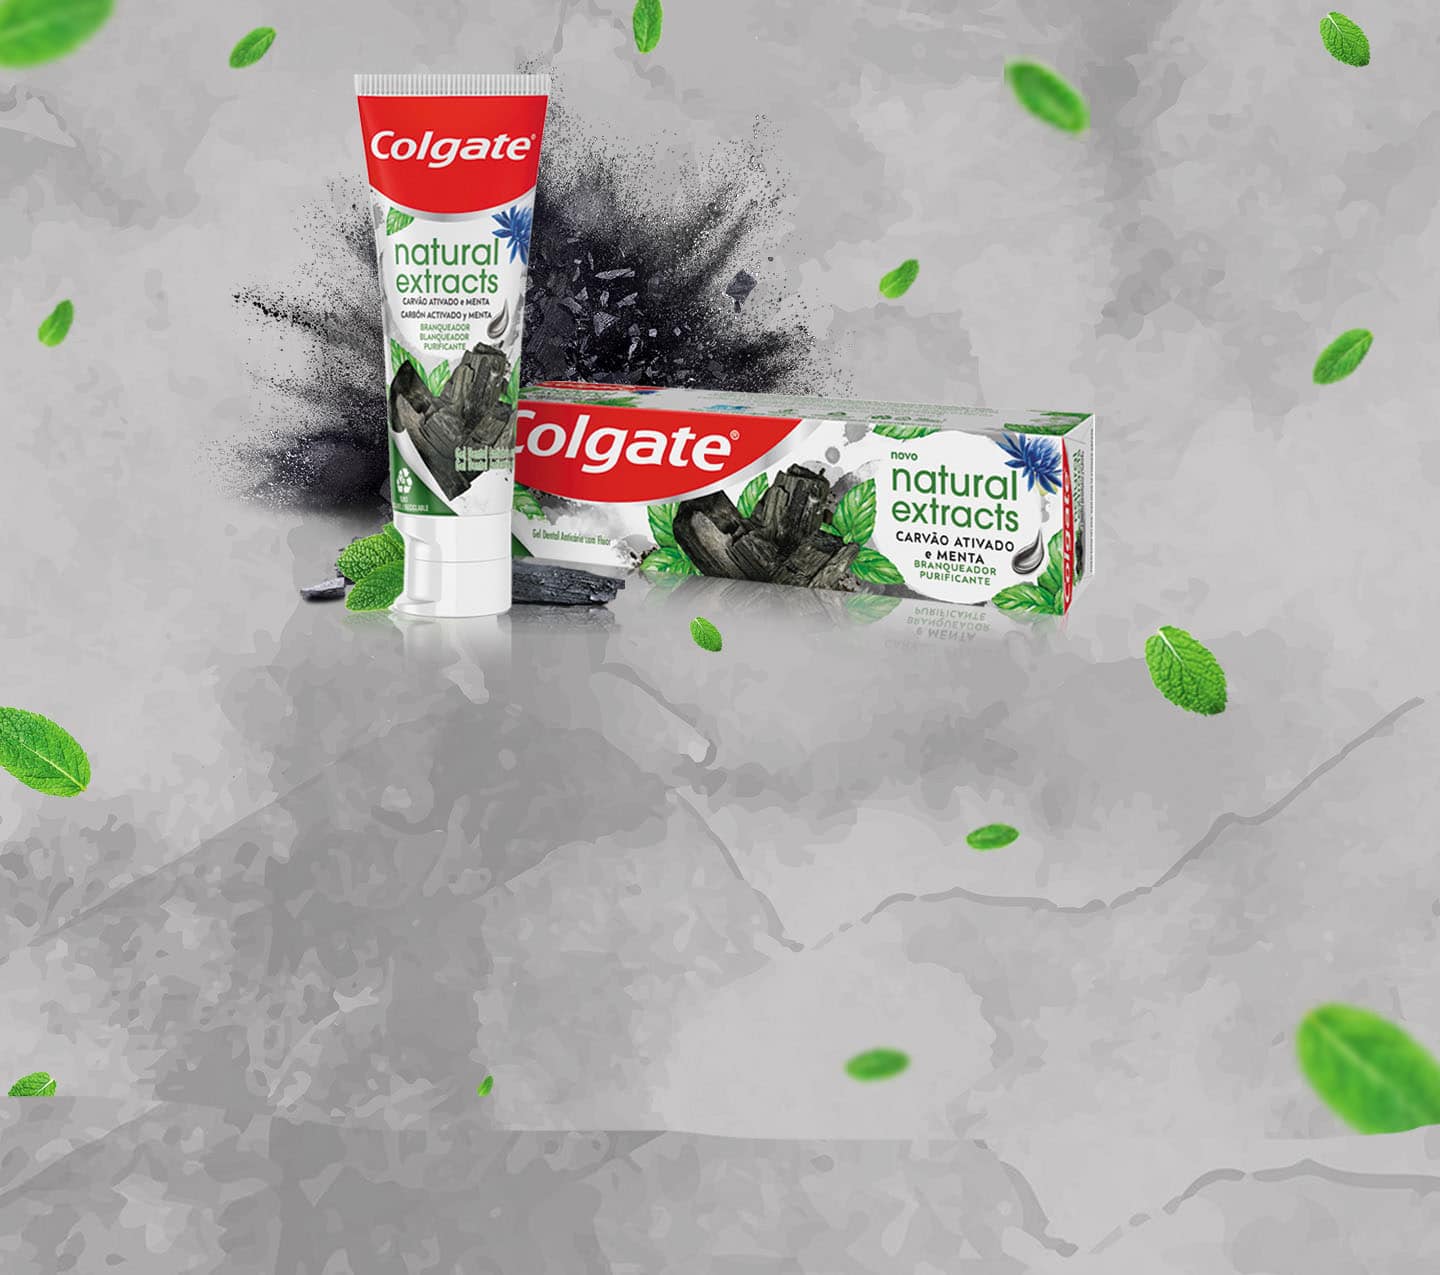 Colgate Natural Extracts